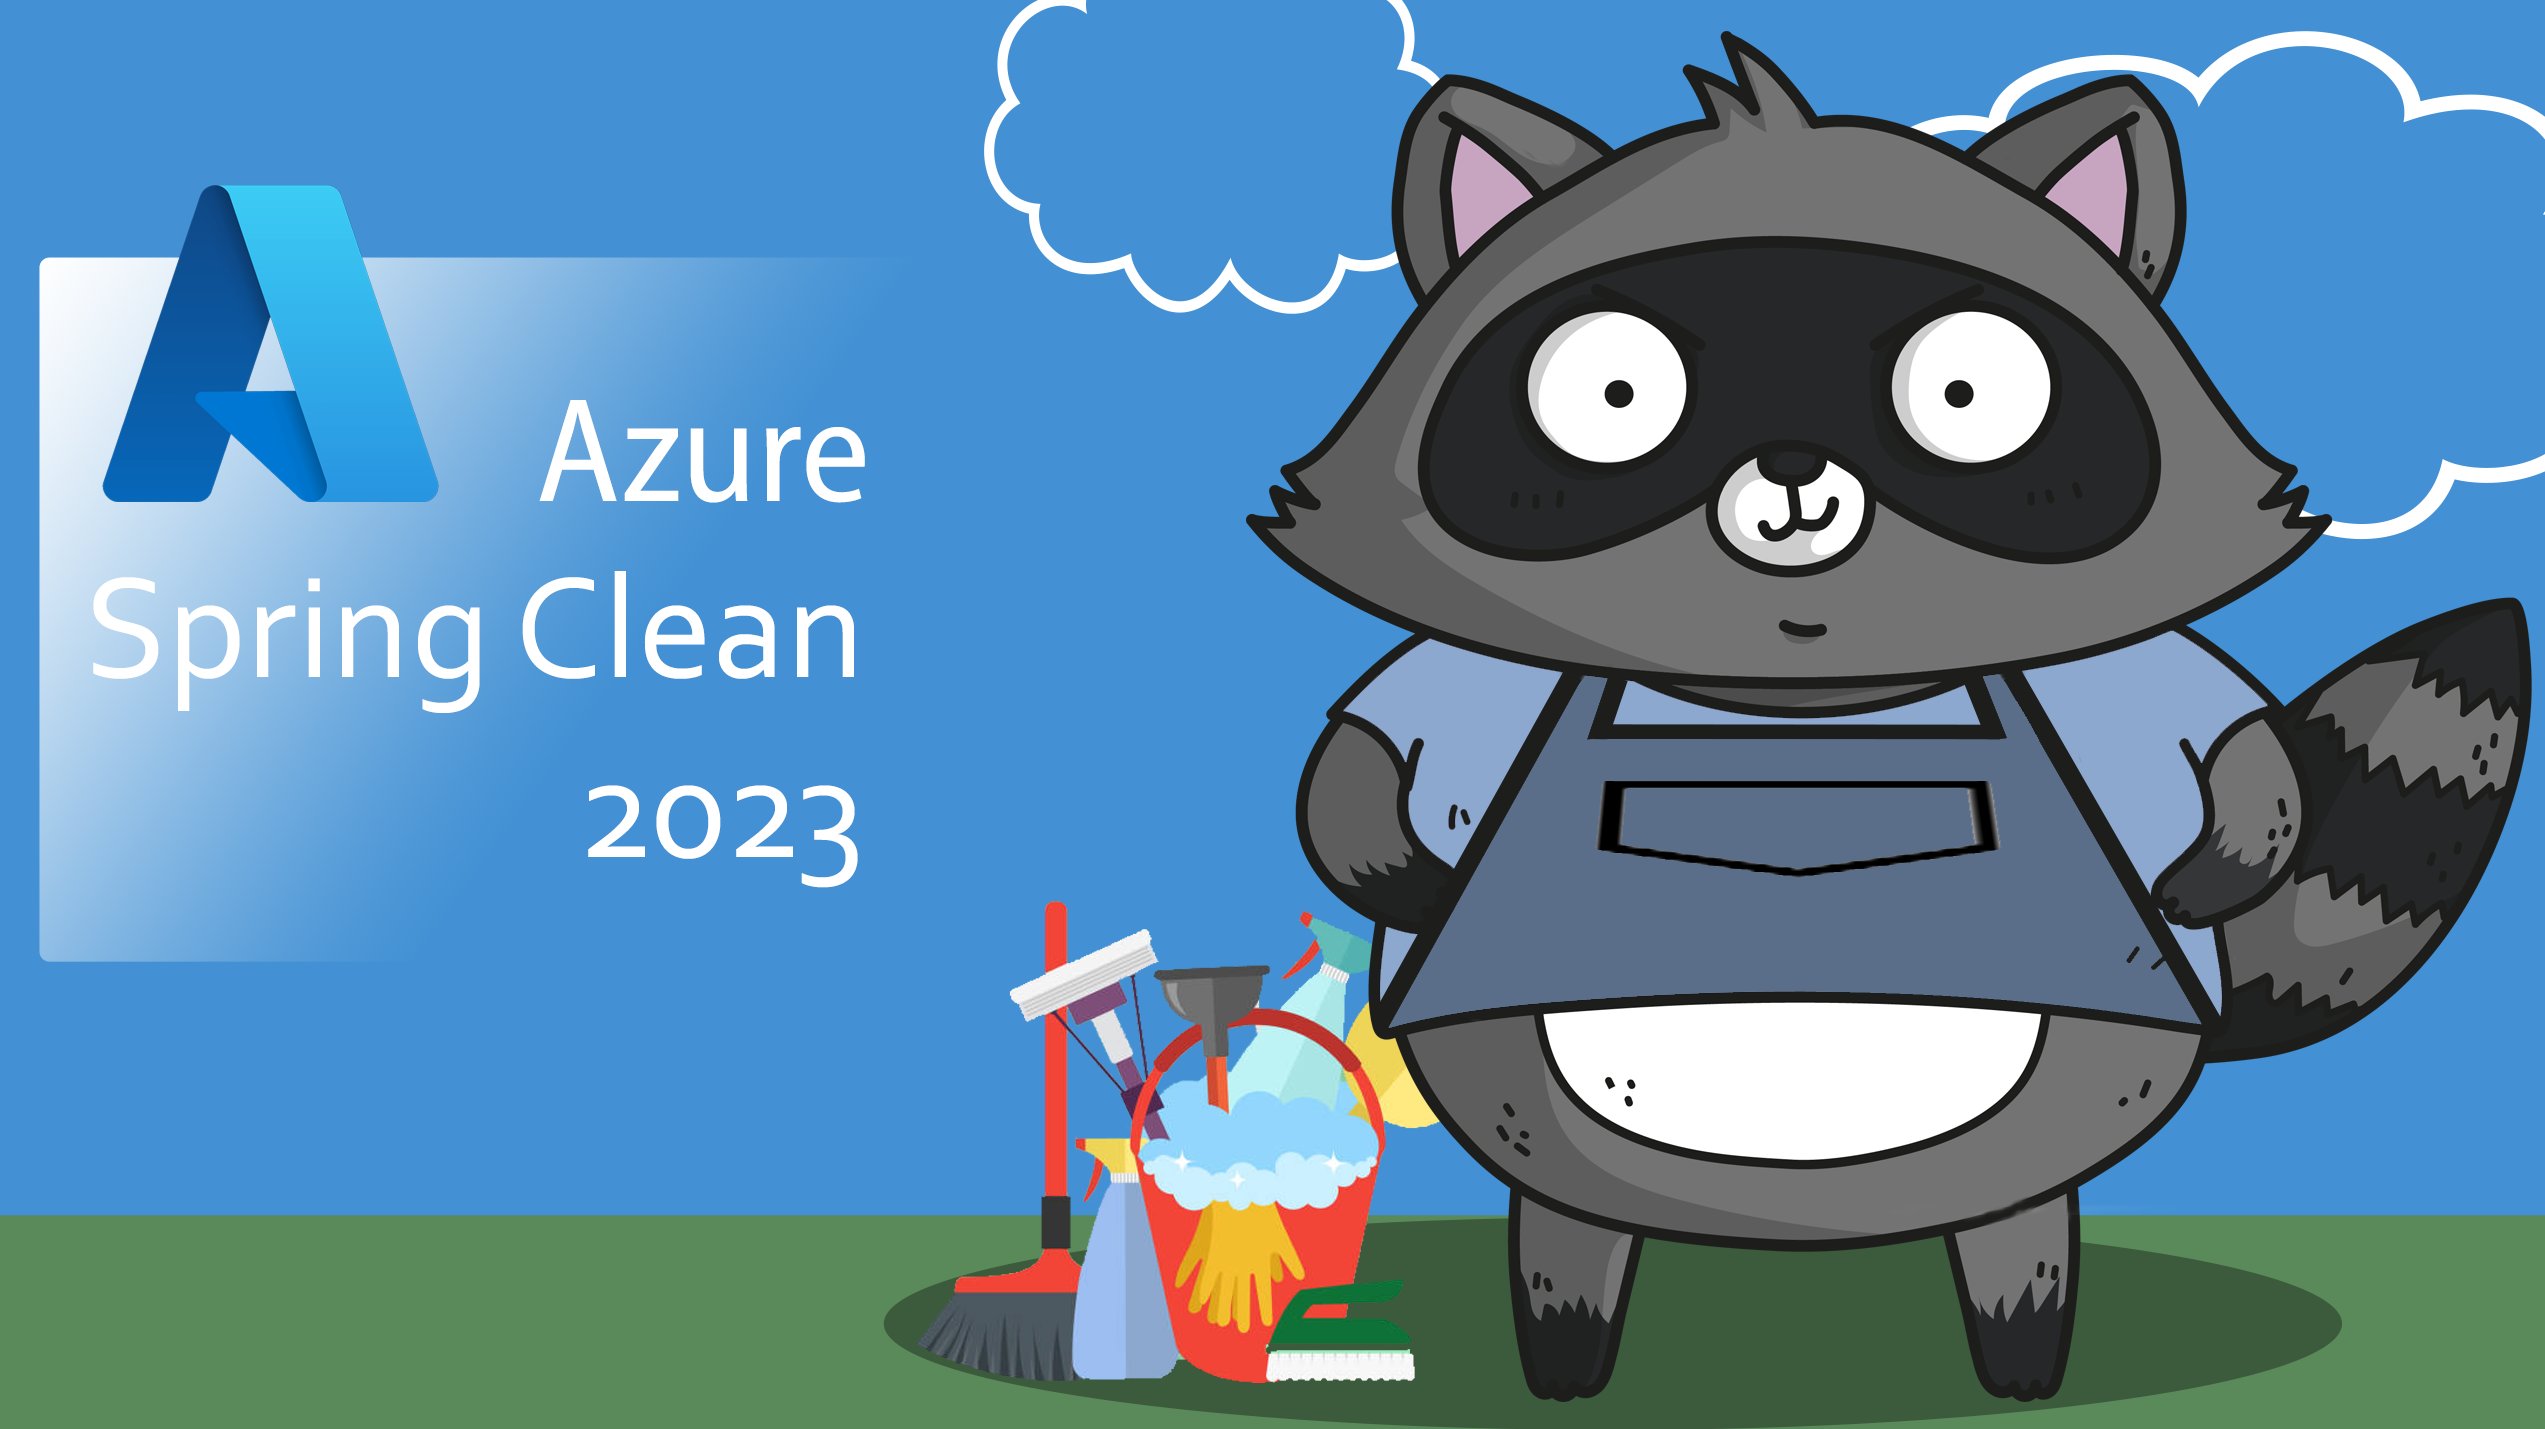 Reduce your Azure cost by finding unused resources